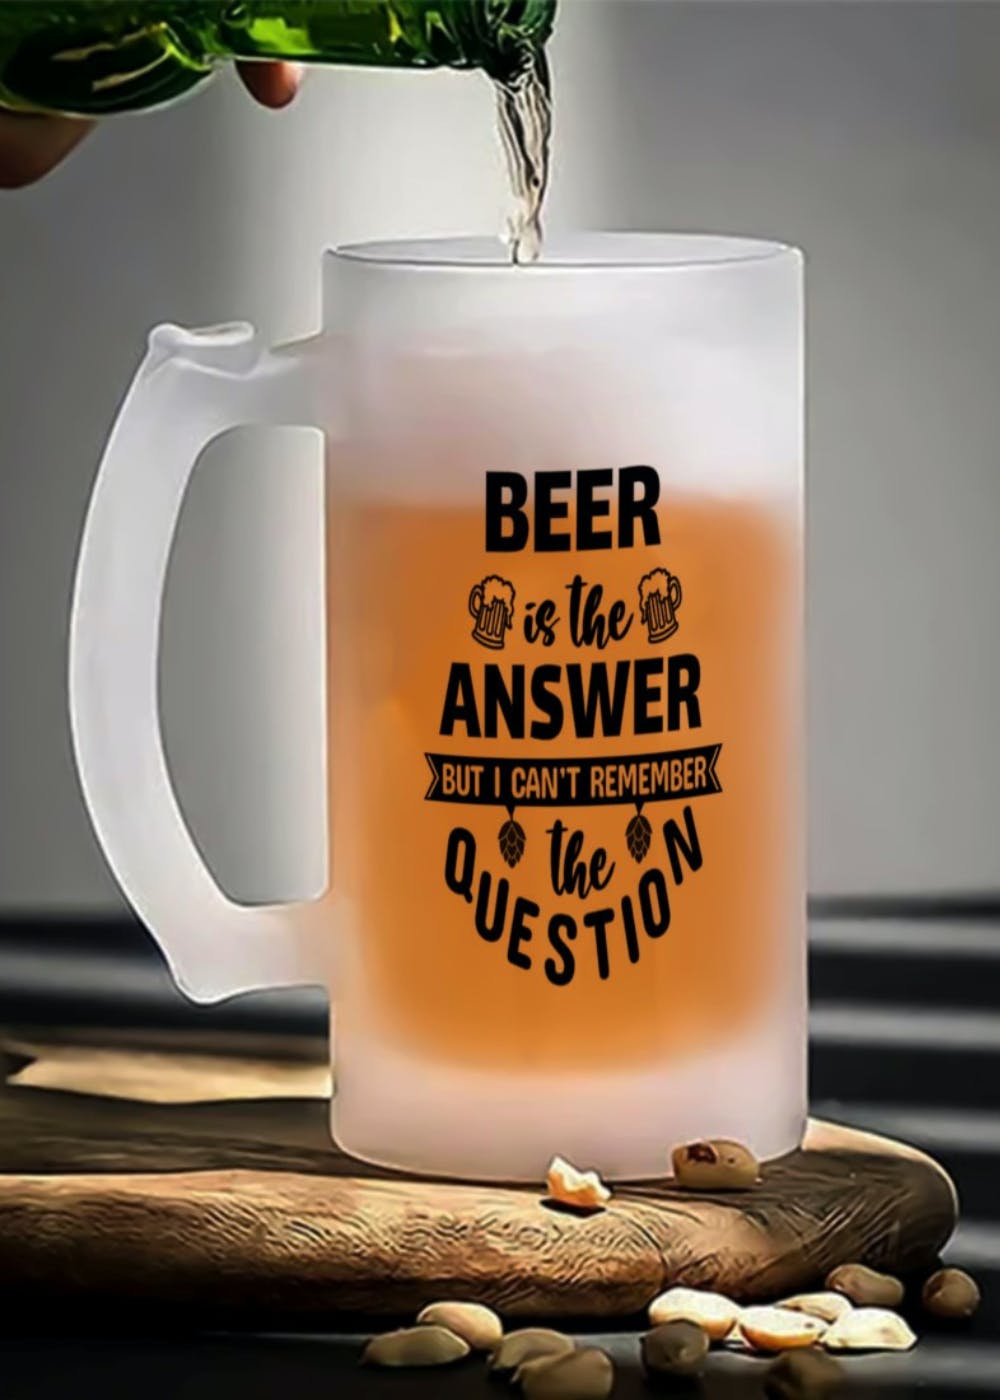 Get Beer Mug With Handle Beer Is The Answer Funny Quotes at ₹ 599 ...